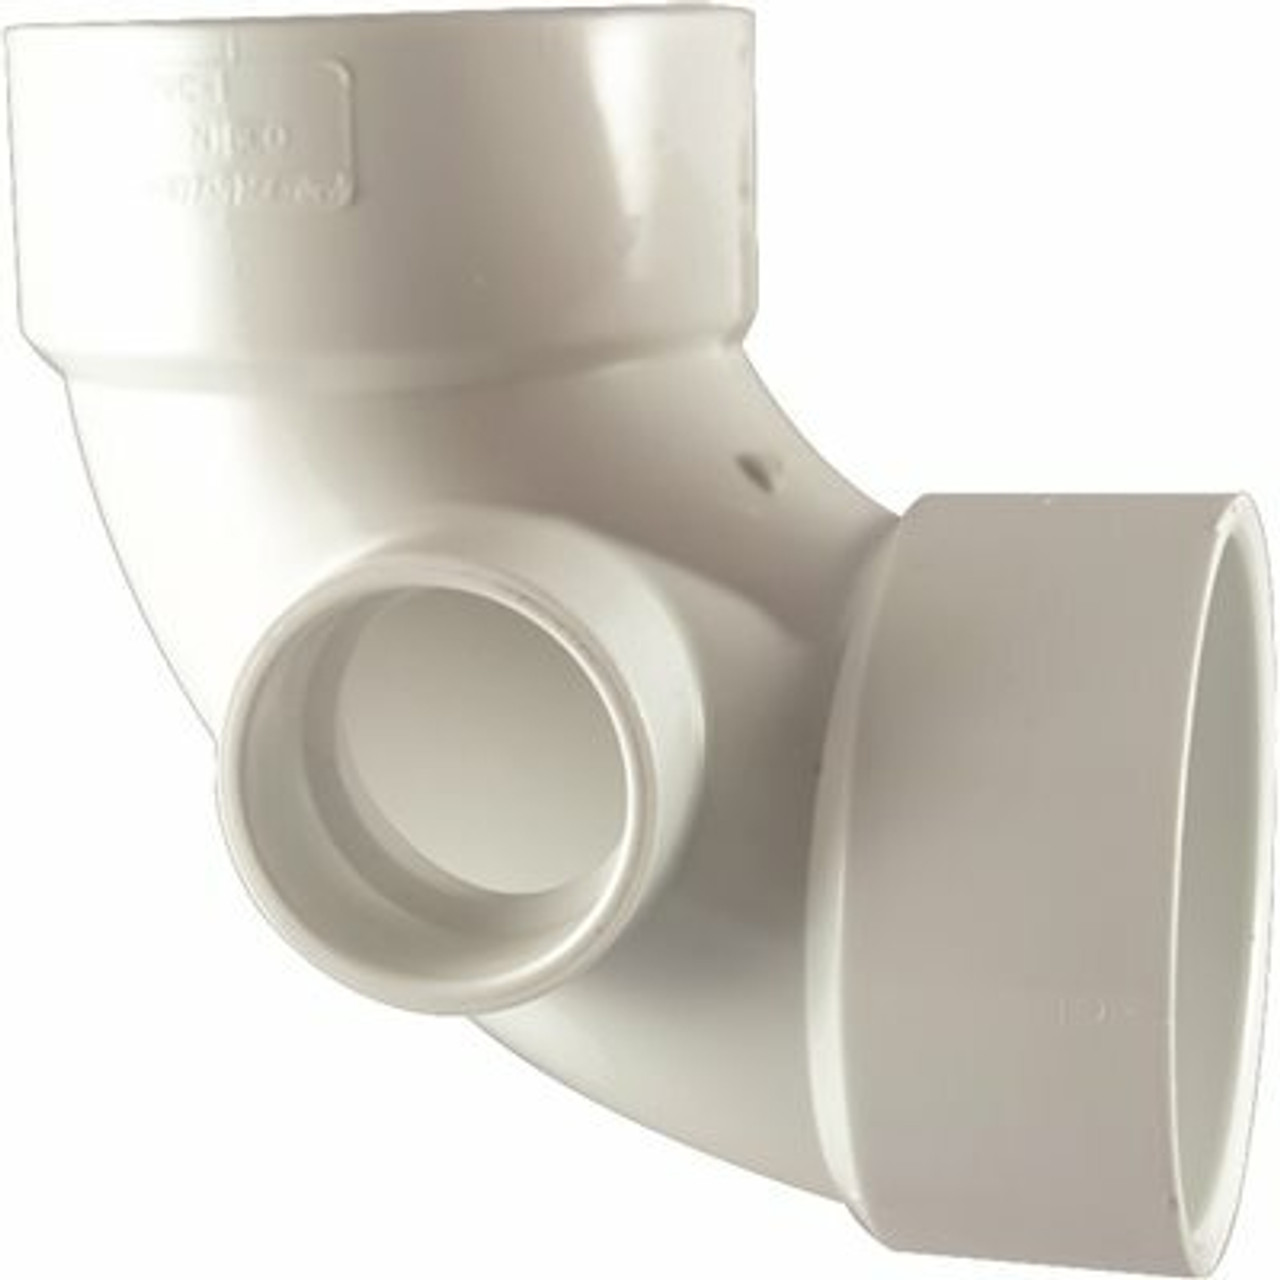 Nibco 3 In. X 3 In. X 2 In. Pvc Dwv 90 Degree Hub X Hub X Hub Elbow With Side Inlet